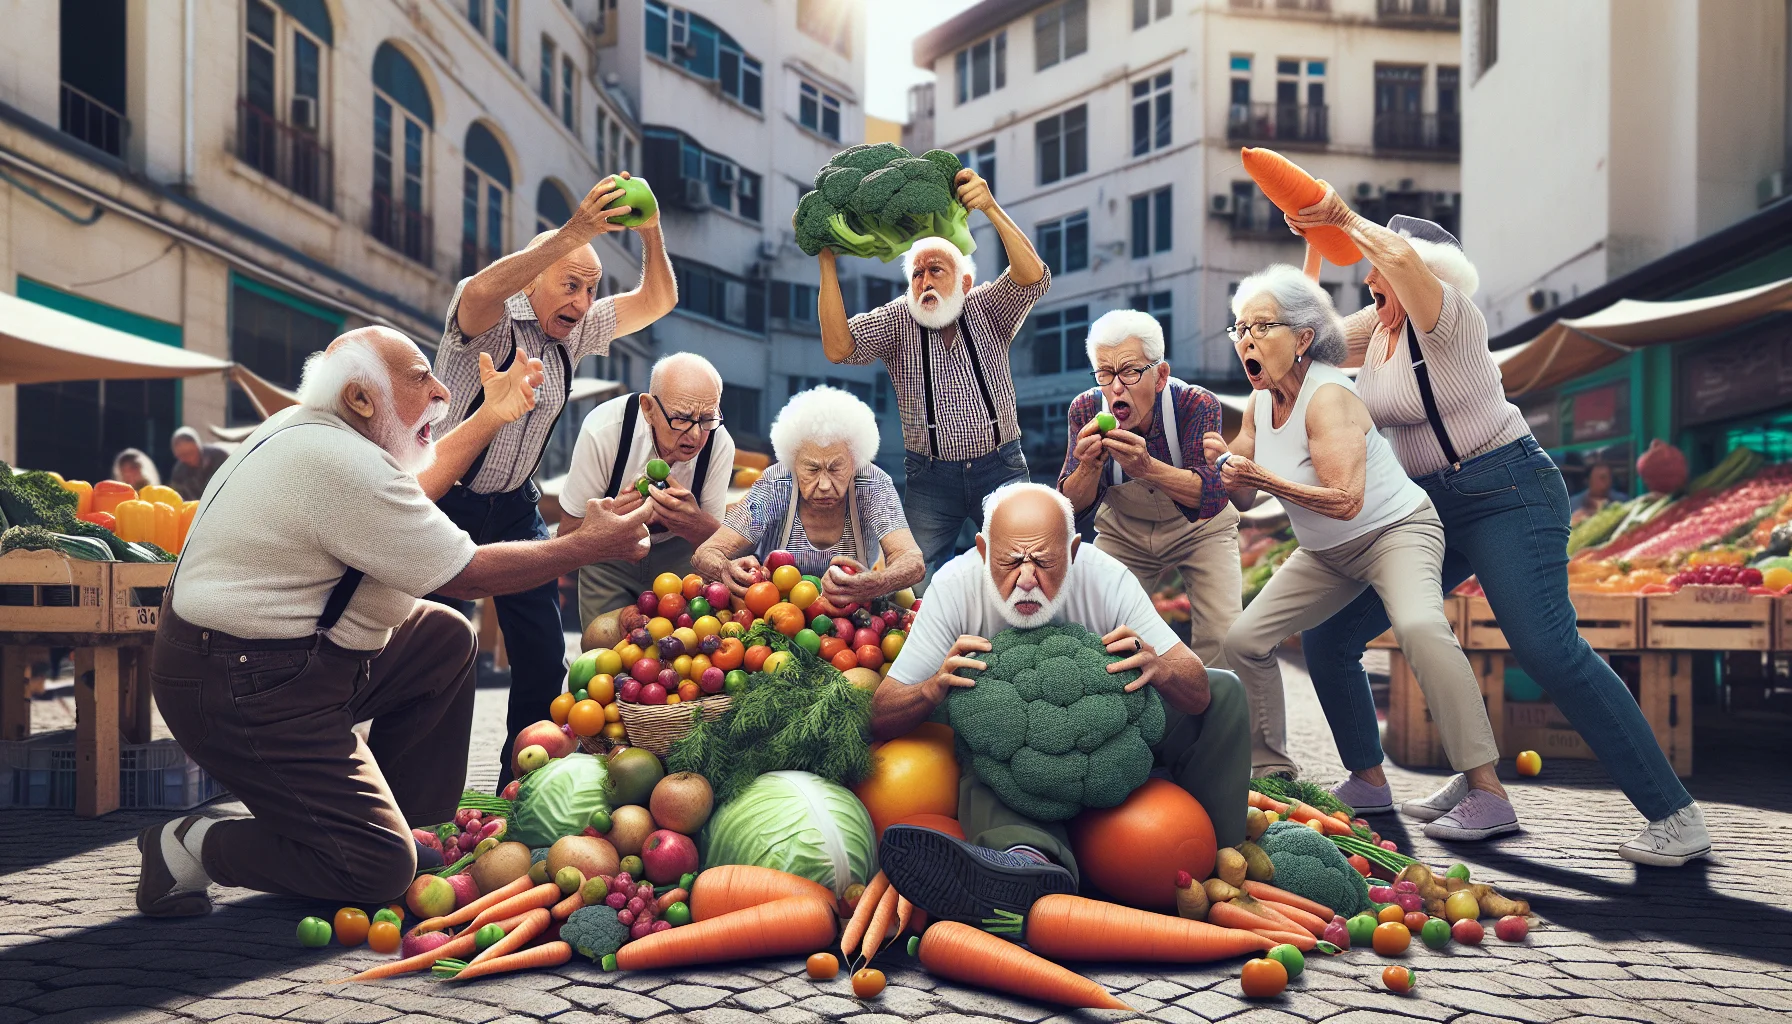 Create a humorous and realistic image that captures the spirit of a Senior Farmers Market Nutrition Program in 2017. Picture an outdoor farmers' market bustling with elderly individuals of various descents, such as Caucasian, Hispanic, Black, Middle-Eastern, and South Asian, each engaging in humorous scenarios related to diet and eating healthy. Perhaps an elderly man struggles to balance a stack of colorful fruits, an old woman examines oversized vegetables with astonishment, or a group of seniors participate in a humorous yet energetic 'carrot tug of war'. Ensure a focus on the delight and absurdity of health-conscious seniors unravelling the secrets of nutritious food.